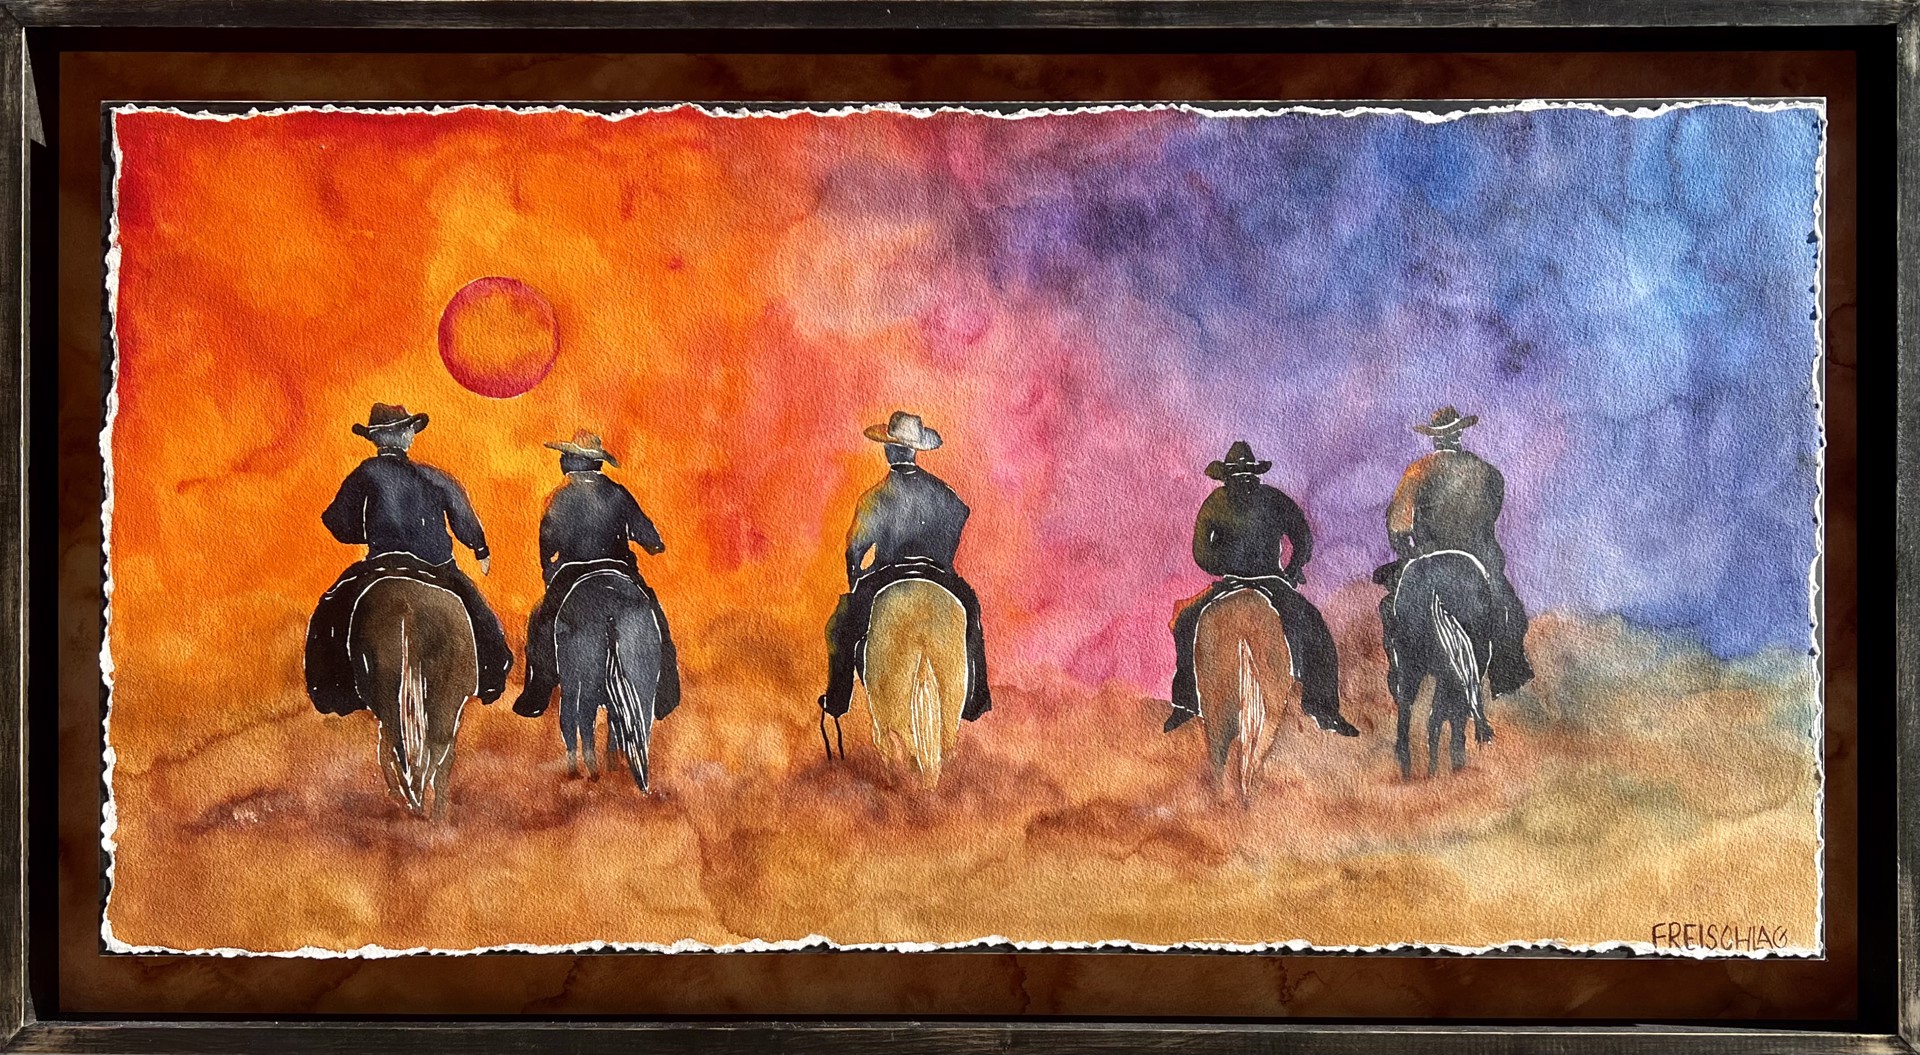 The Cowboy’s Color by Peter Freischlag